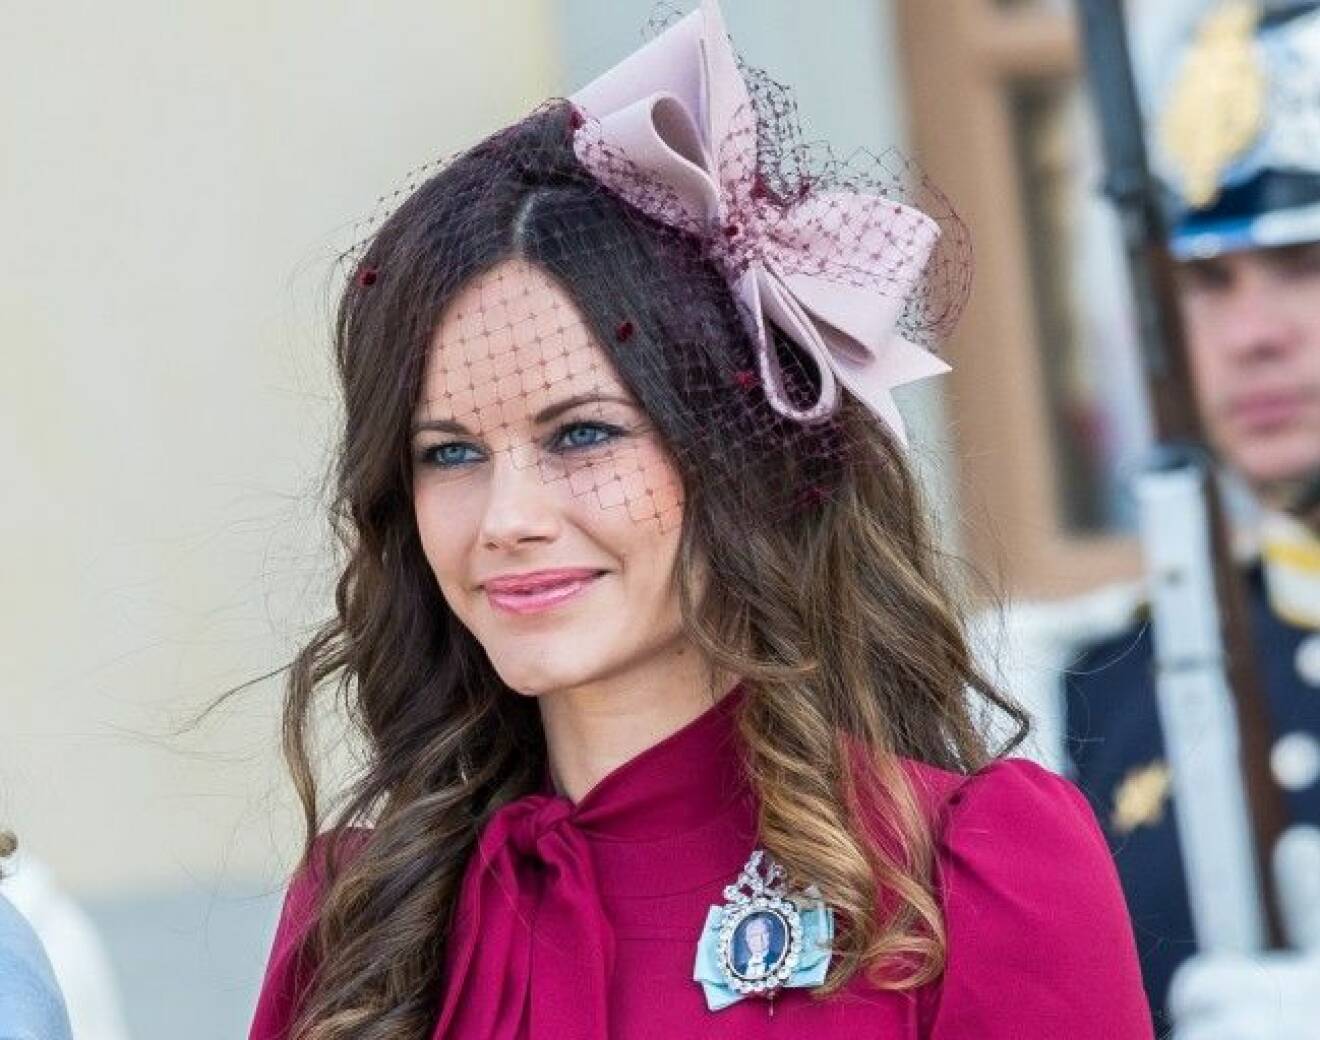 2015-10-11, Drottningholm Palace Church, Sweden In pic: Princess Sofia Today was the baptism of Princess Madeleine and Christopher O'Neill's son - Prince Nicolas at the Drottningholm Palace Church. From the swedish royal family was also King Carl Gustaf, Queen Silvia, Crown Princess Victoria, Prince Daniel, Estelle, Prince Carl Philip and Princess Sofia attended. After the naming ceremony that began at 12:00 gave the royal couple a reception inside the Drottningholm Palace. Pictures of this event. All Over Press